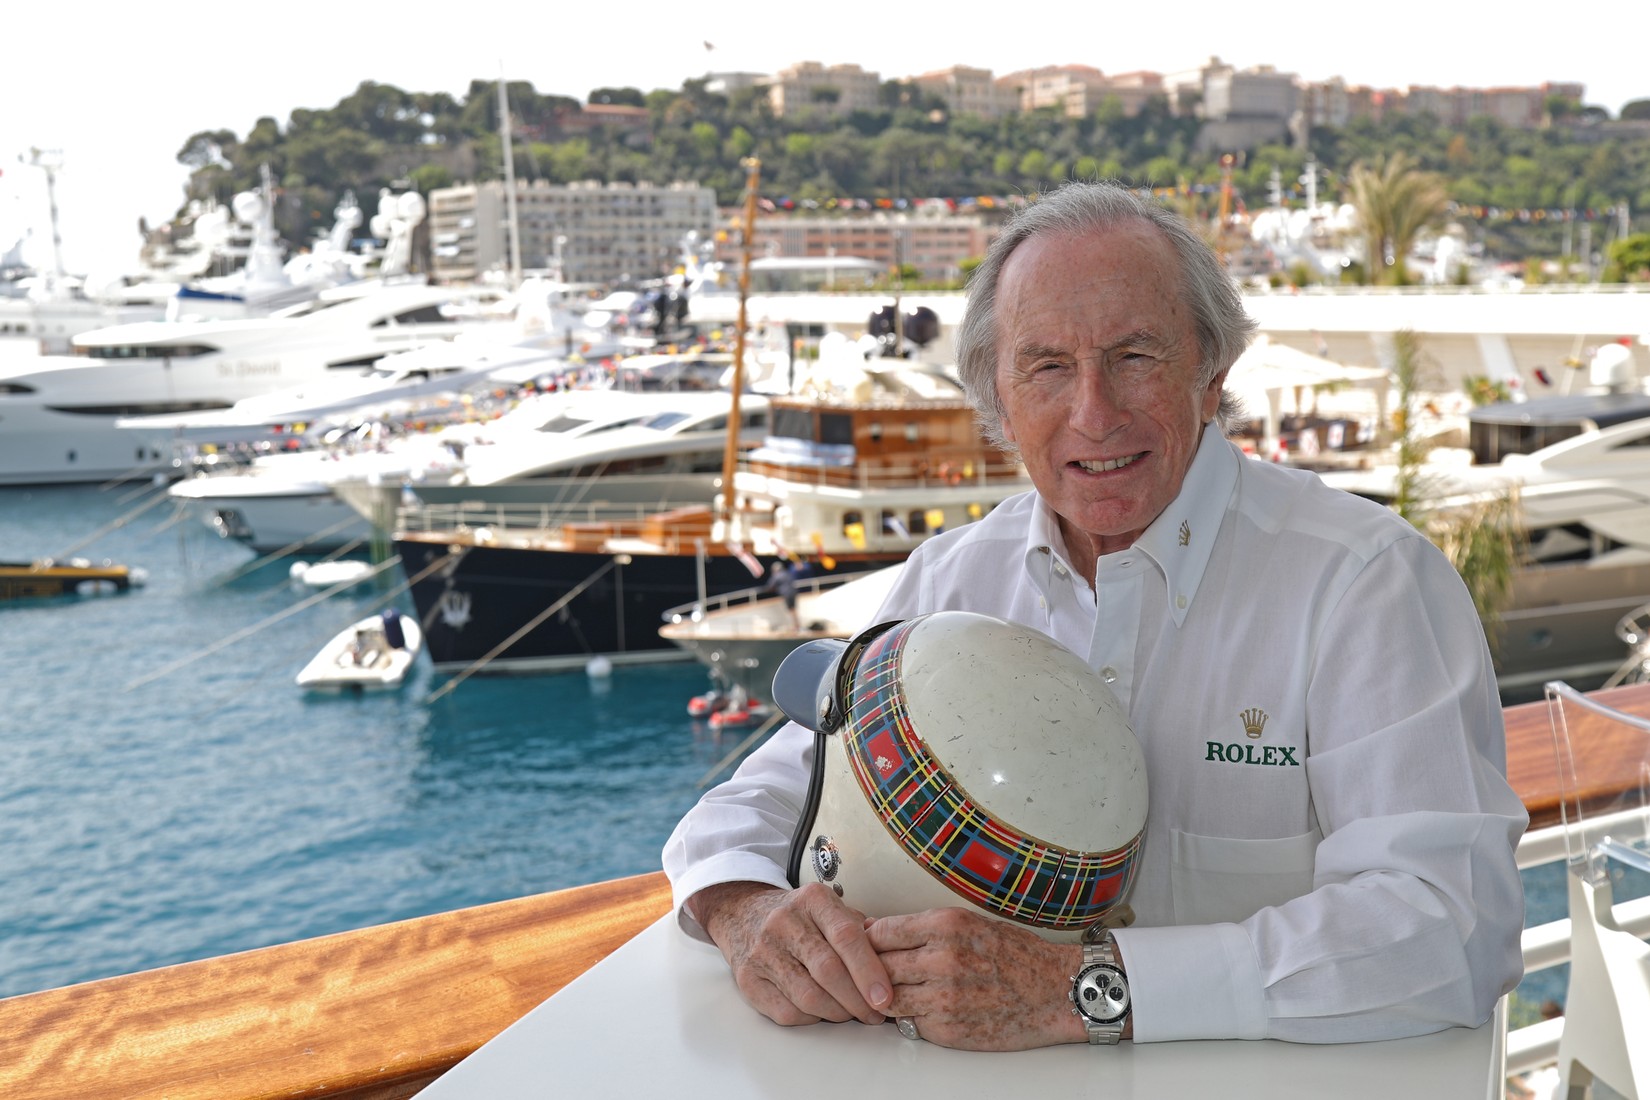 Rolex and Sir Jackie Stewart Celebrate Long History in Formula One